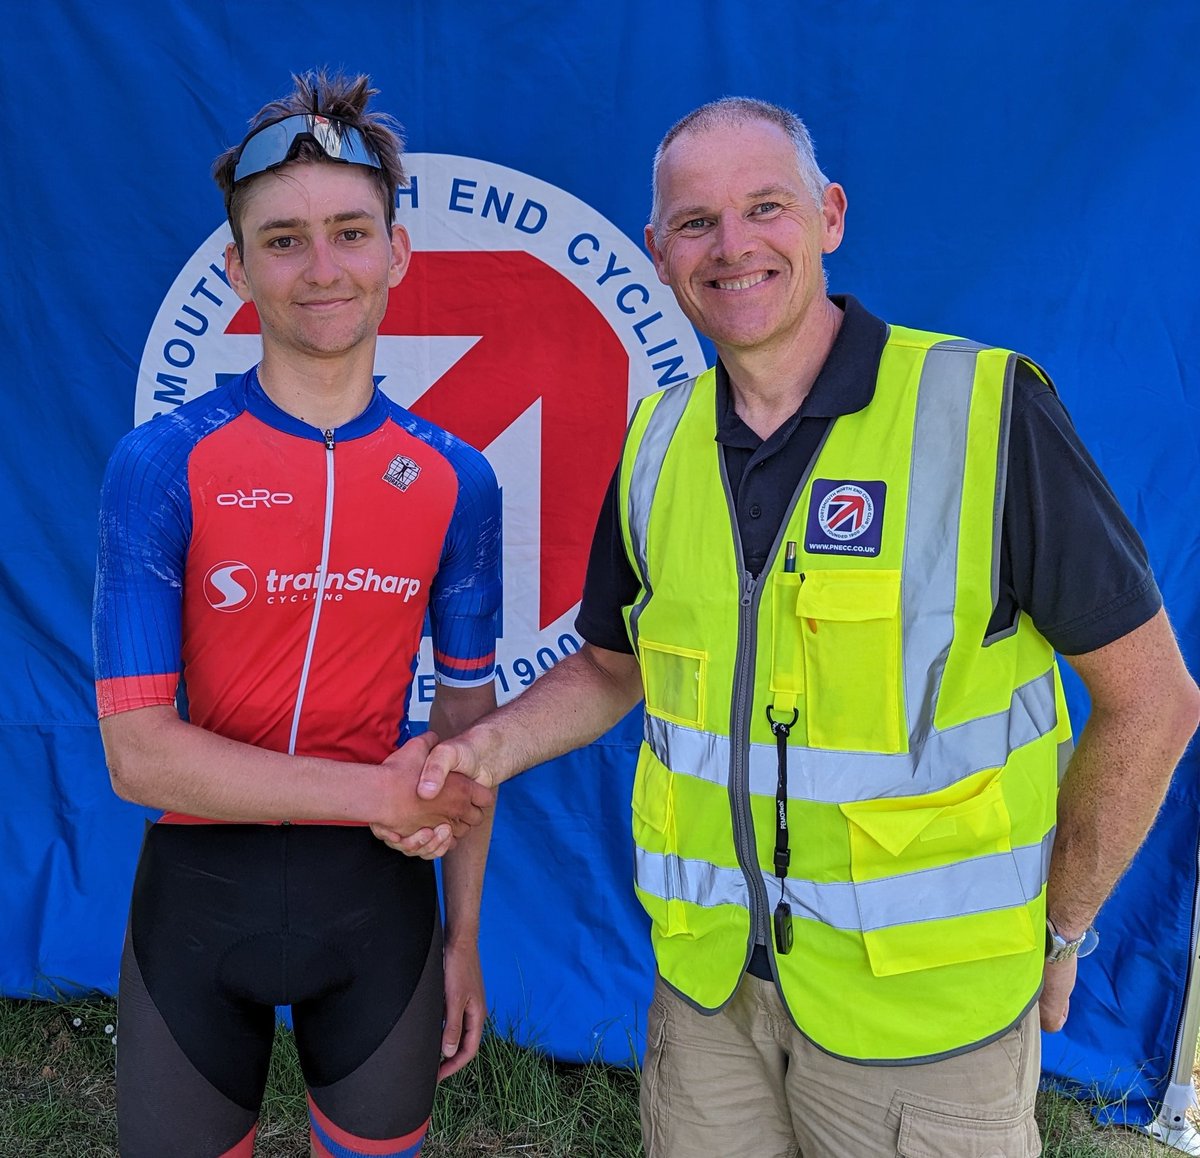 Great racing today, our thanks to all the officials, NEG, Accredited Marshals, Medical and Club Volunteers that are all part of the matrix that makes these events happen. Pictured, Danylo Riwwnyi @TrainSharp Elite with organiser and Club Chair @Peter_Mac_